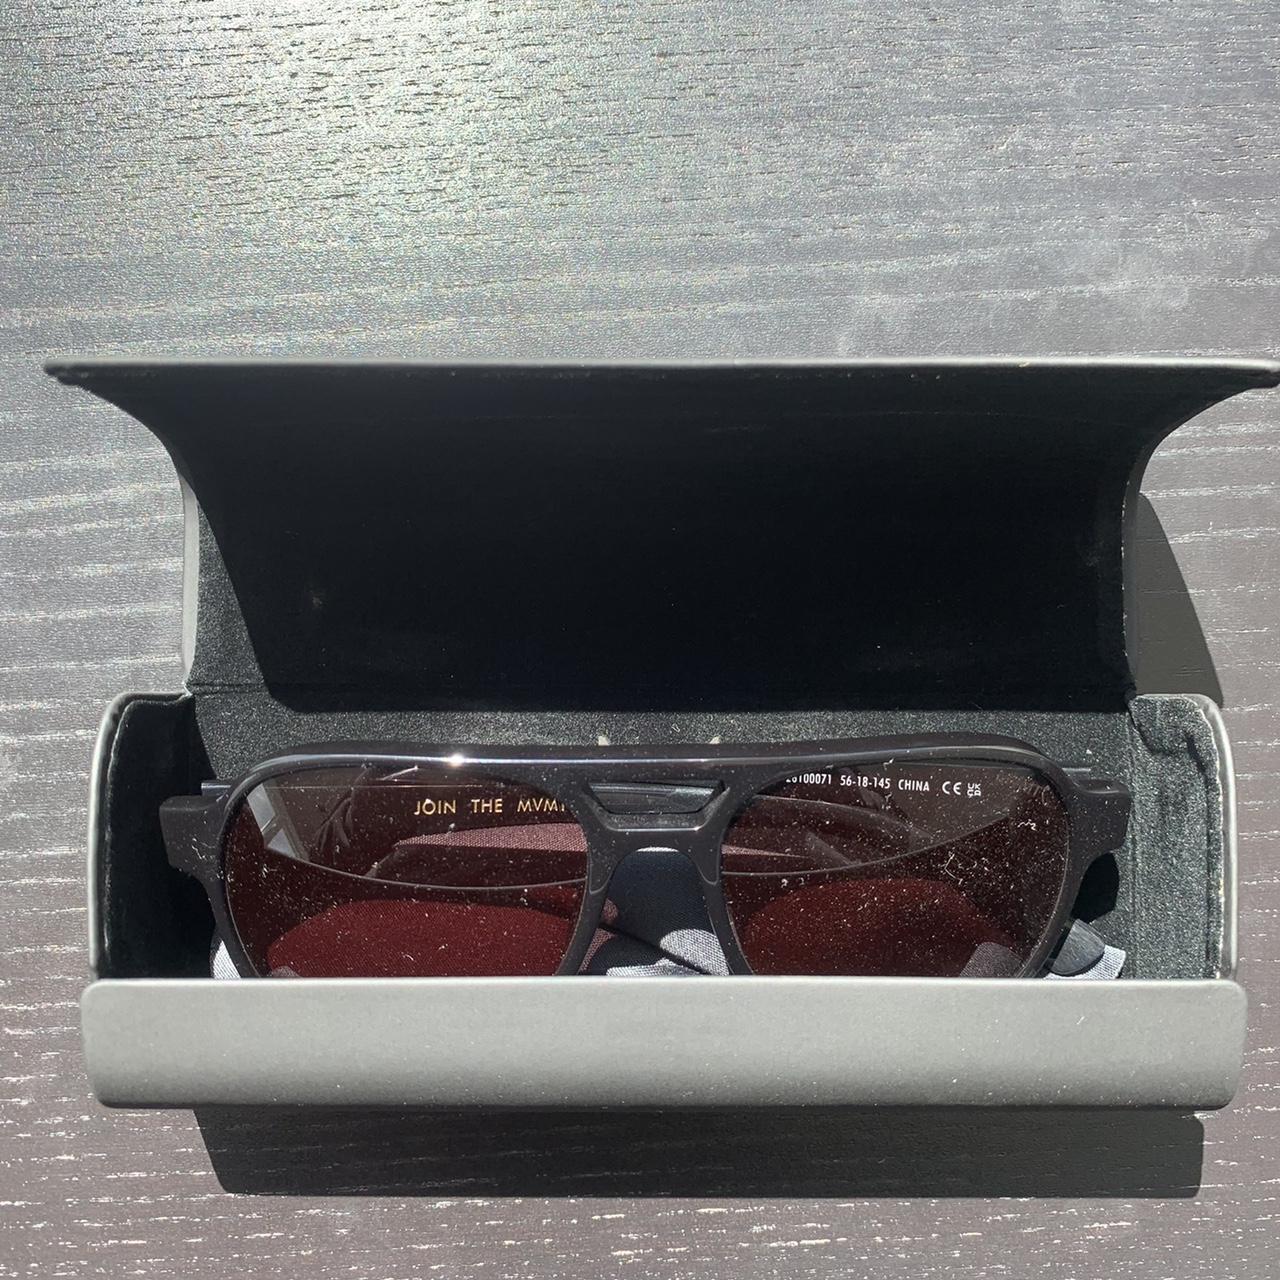 Product Image 3 - BRAND NEW MVMT Ace Sunglasses
Only